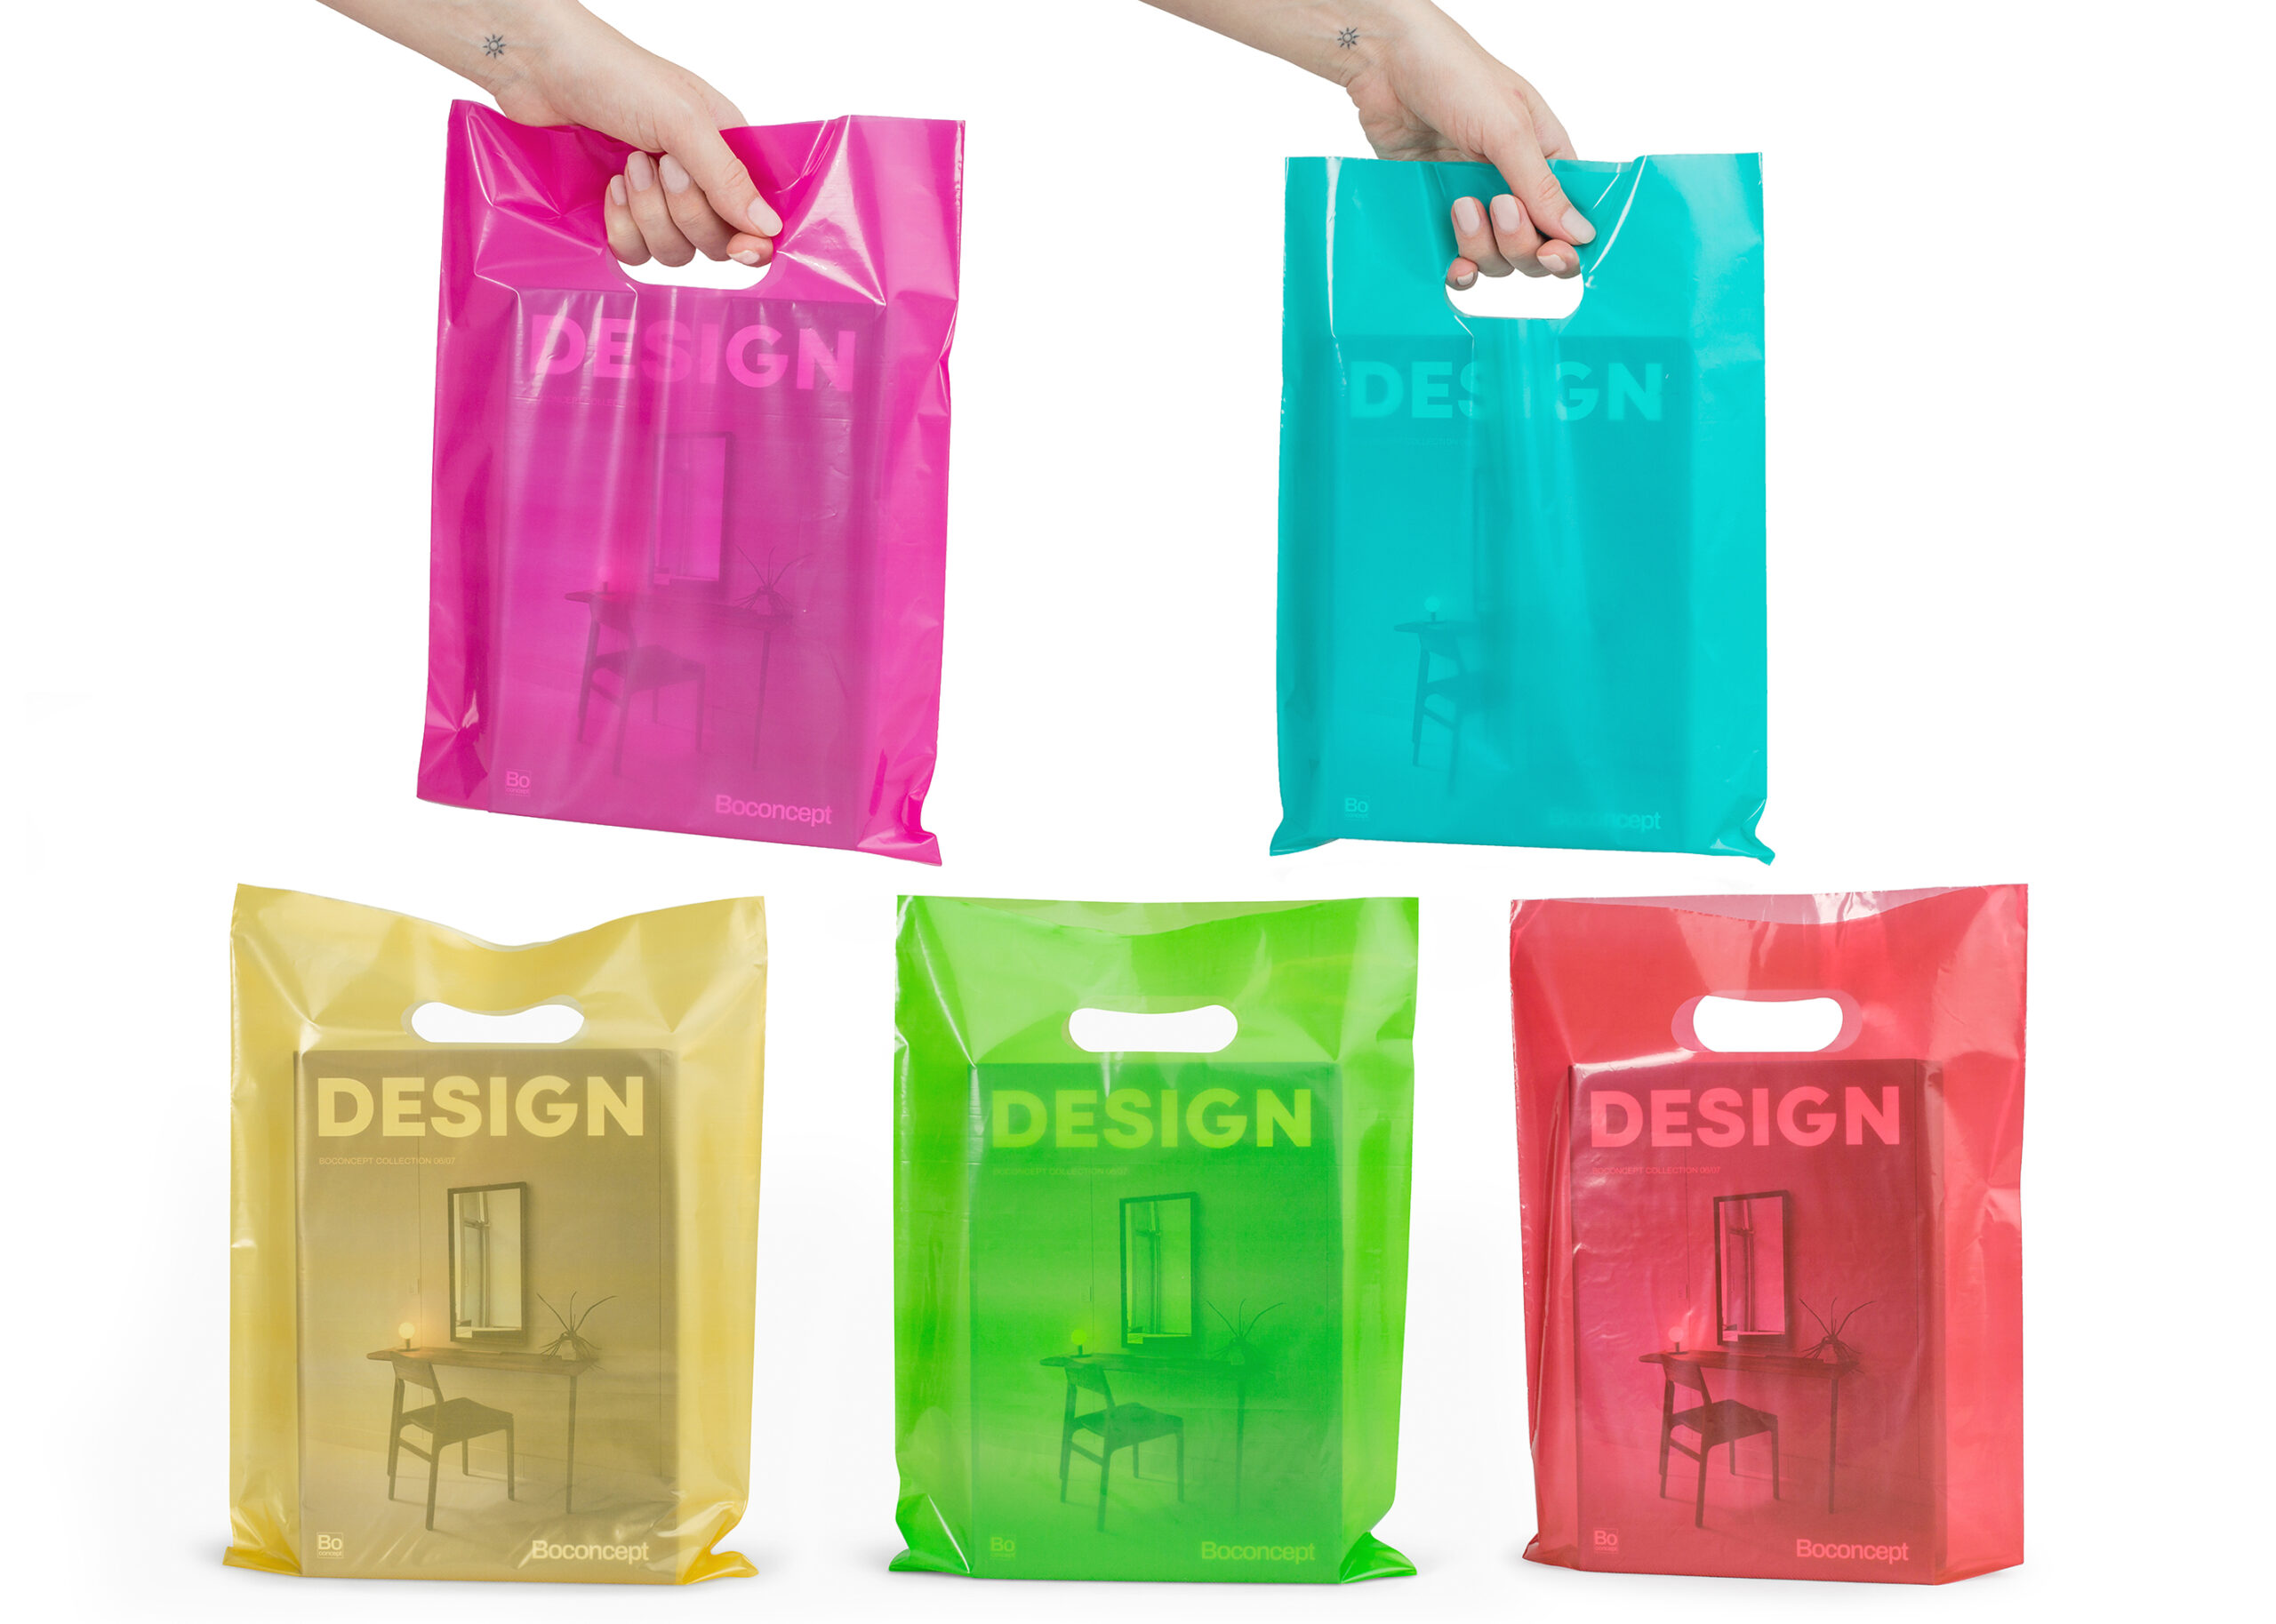 100 Multicolor Party Bags 1.5Mil, 9" x 12" Extra Thick Glossy Plastic Retail Merchandise Bags with Die Cut Handles, No Gusset Perfect Thank You Bags for Customers, Boutique bags, Gifts and Tradeshows